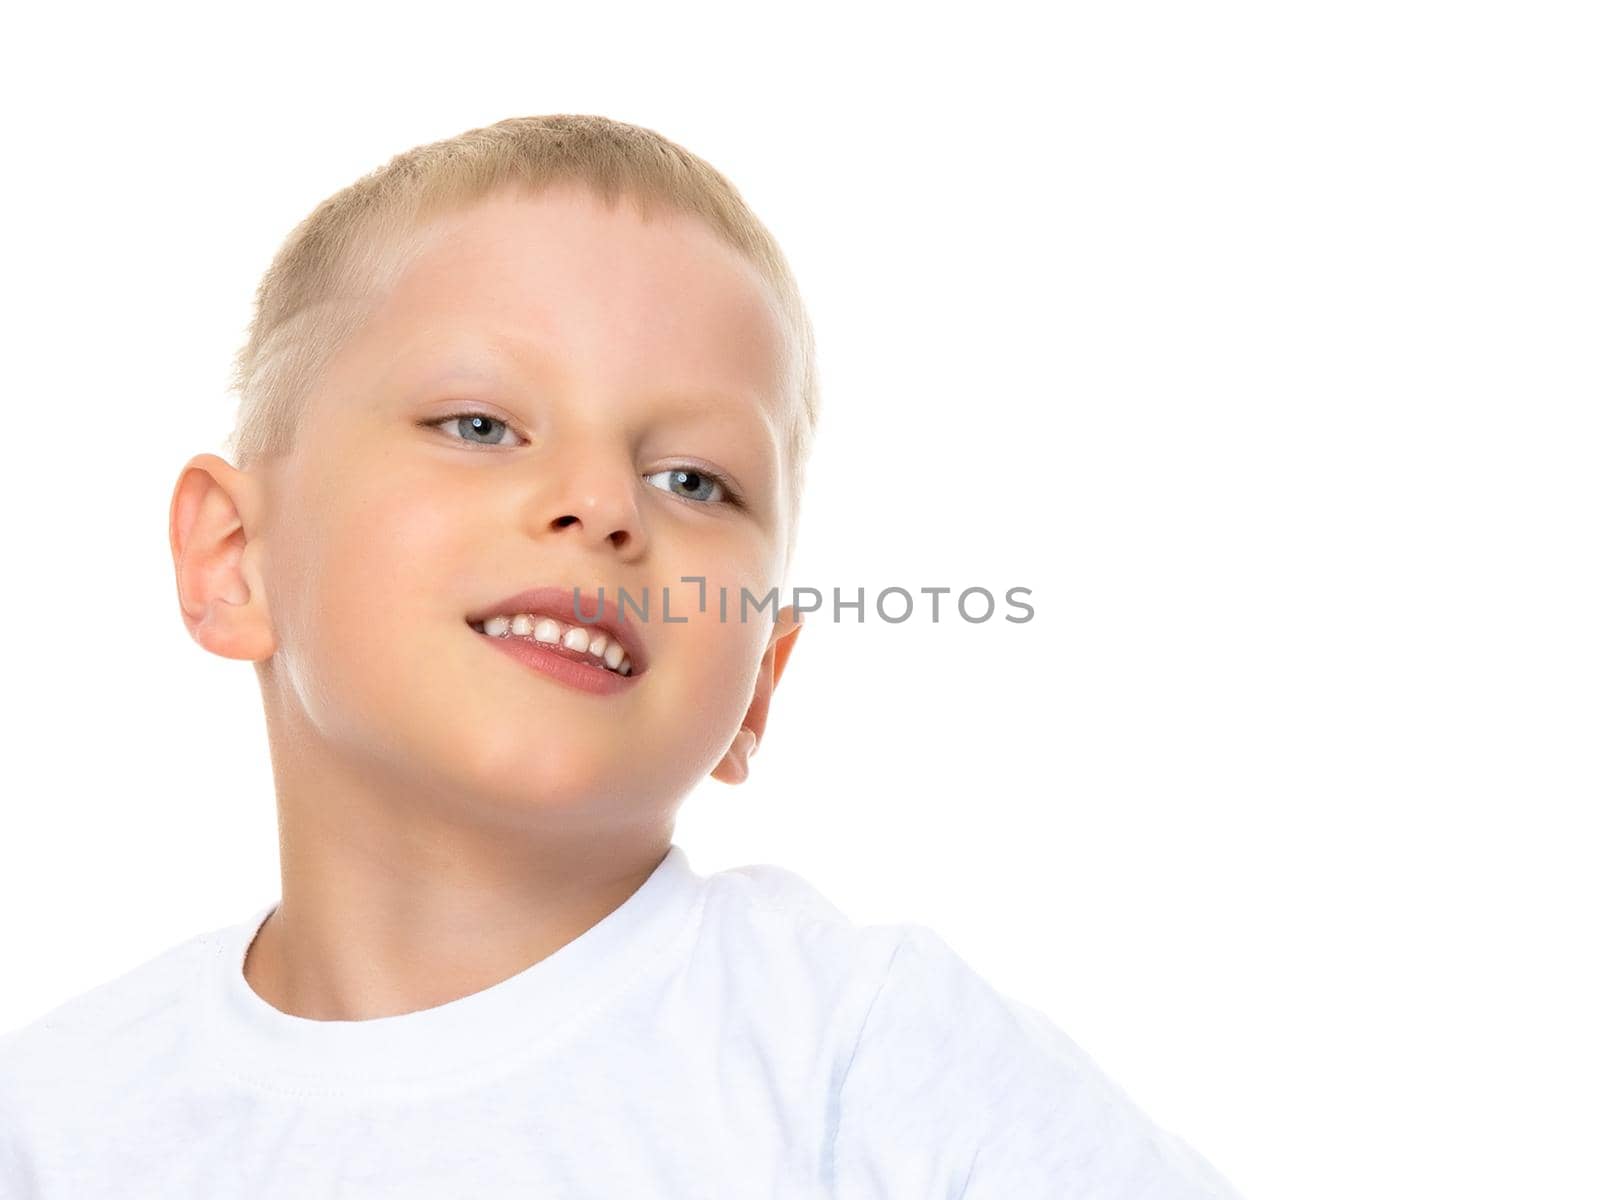 Smiling little boy, studio portrait on white background. The concept of a happy childhood, well-being in the family. Close-up. Isolated.